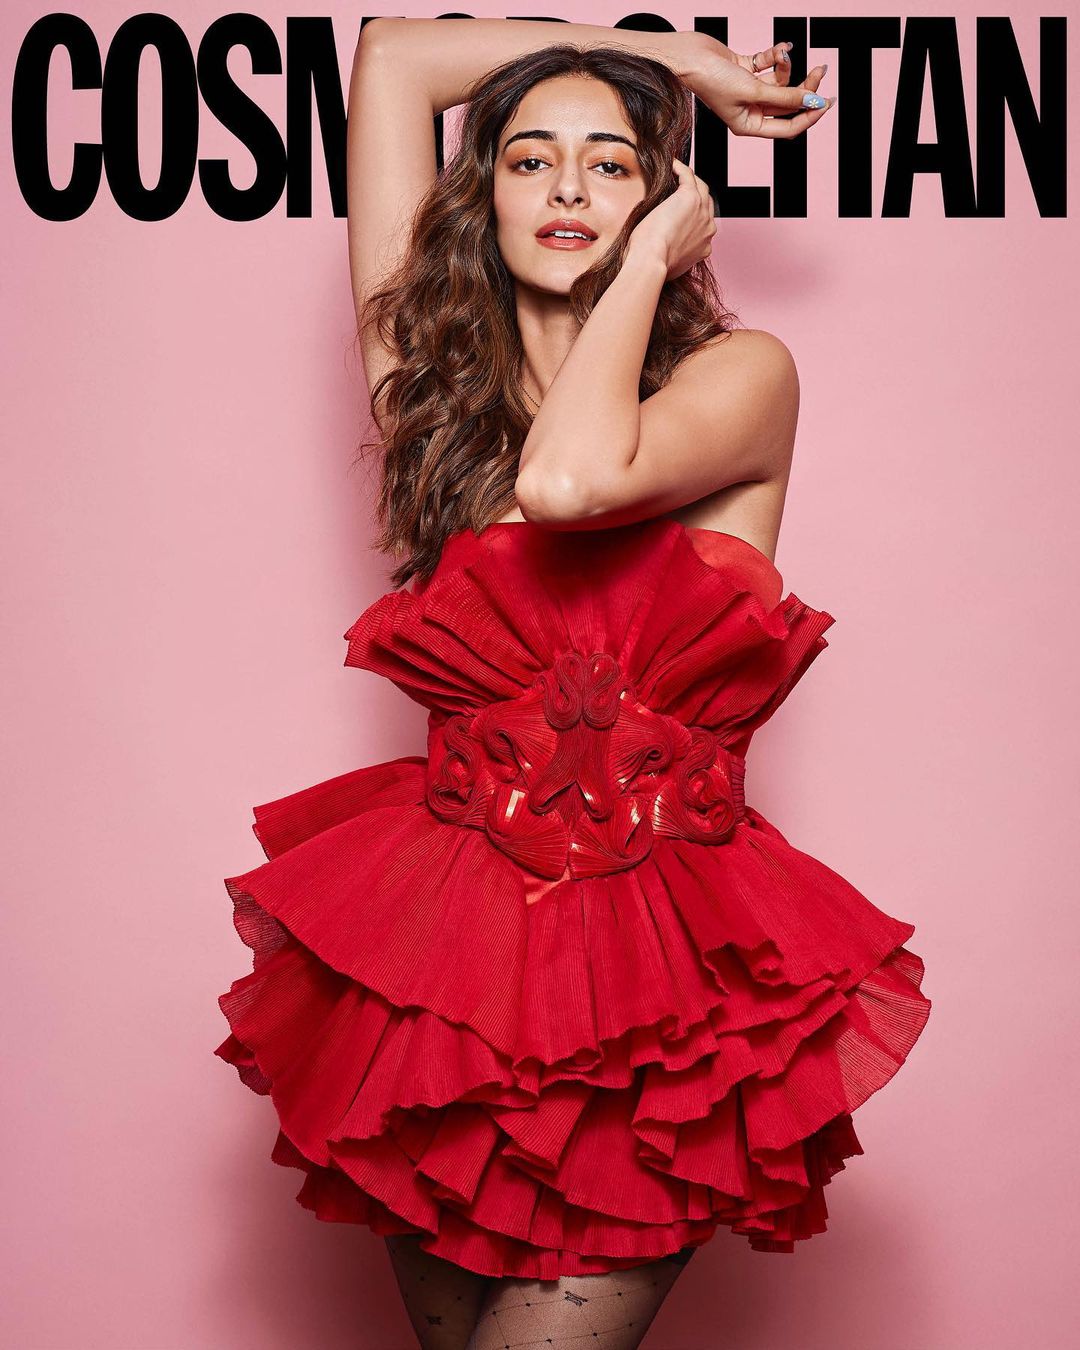 Ananya Panday looks mesmerising in the red skater dress